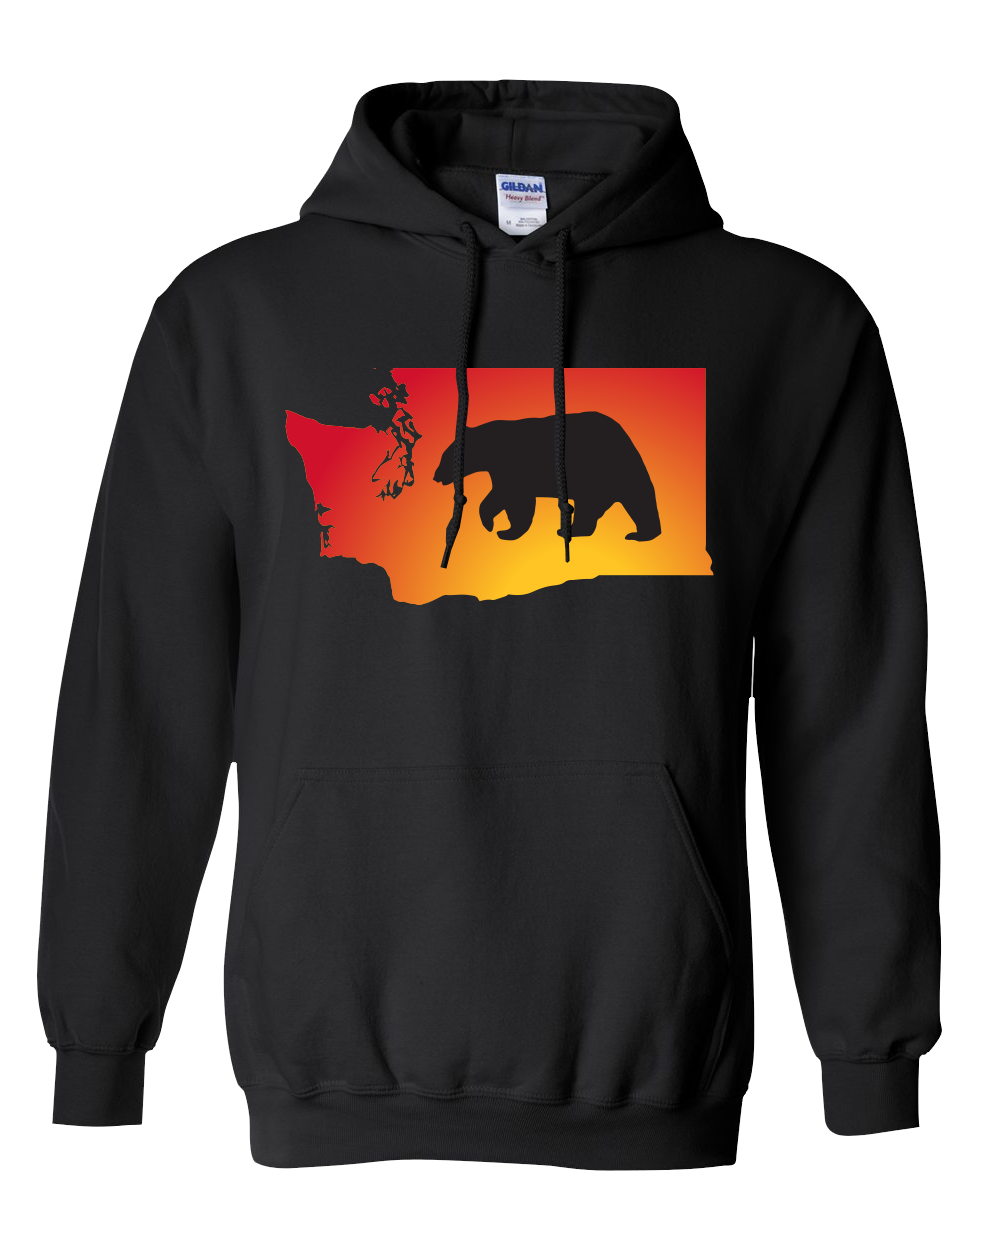 Pullover Hooded Sweatshirt Washington Black Black Bear Vibrant Design High Quality Tight Knit Ring Spun Low Maintenance Cotton Printed With The Newest Available Color Transfer Technology